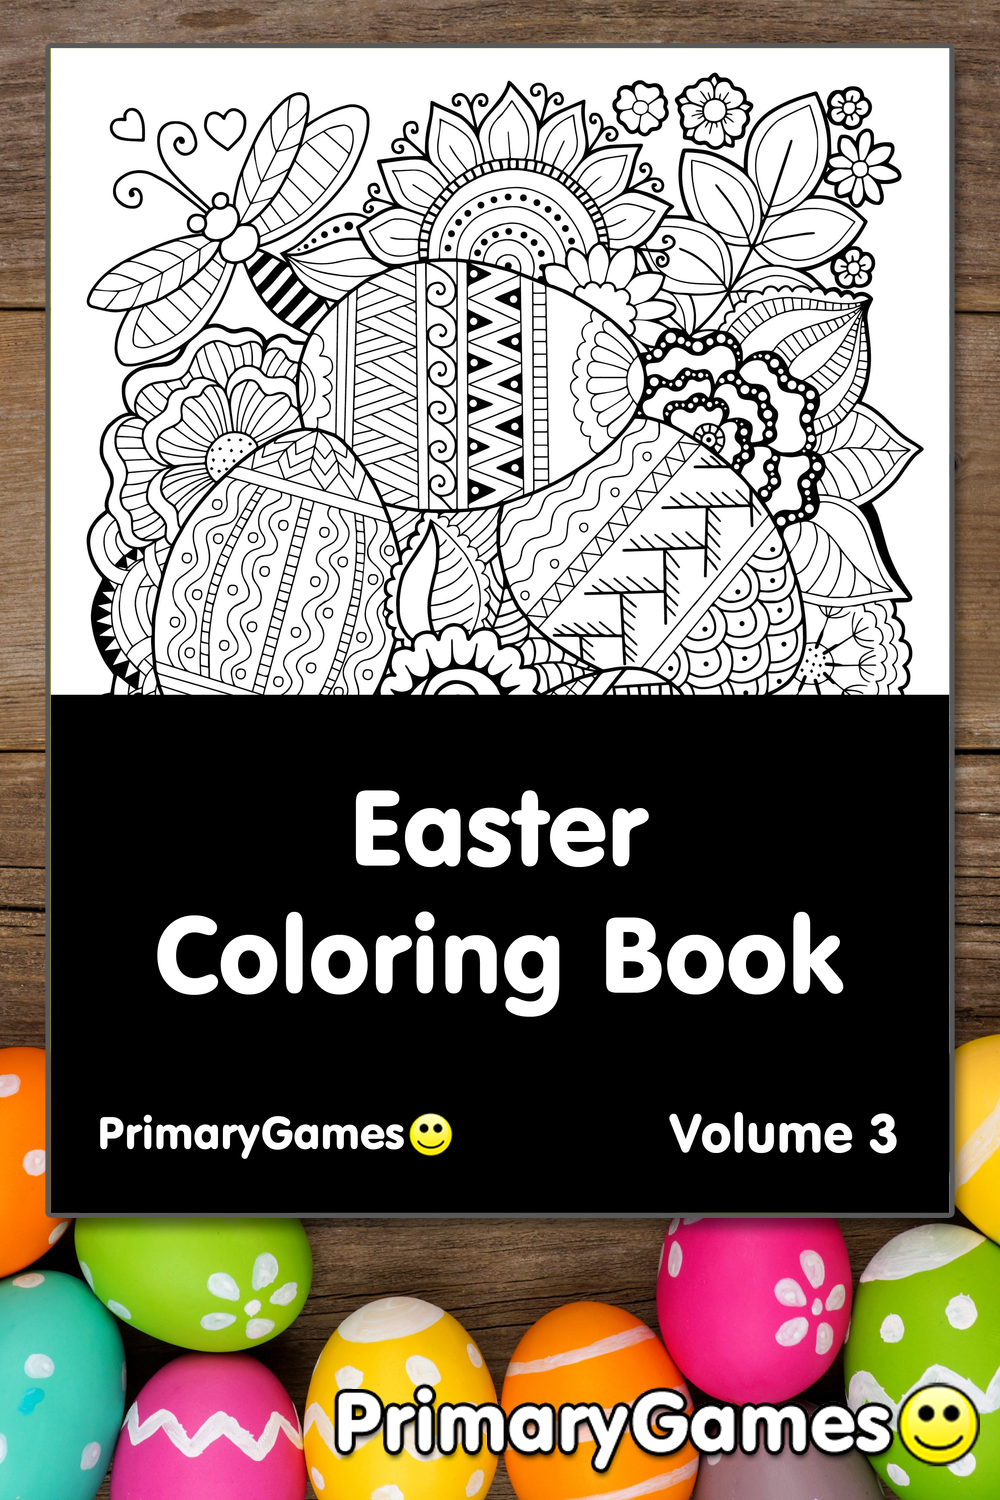 Easter Coloring eBook Volume 3 • FREE Printable PDF from PrimaryGames